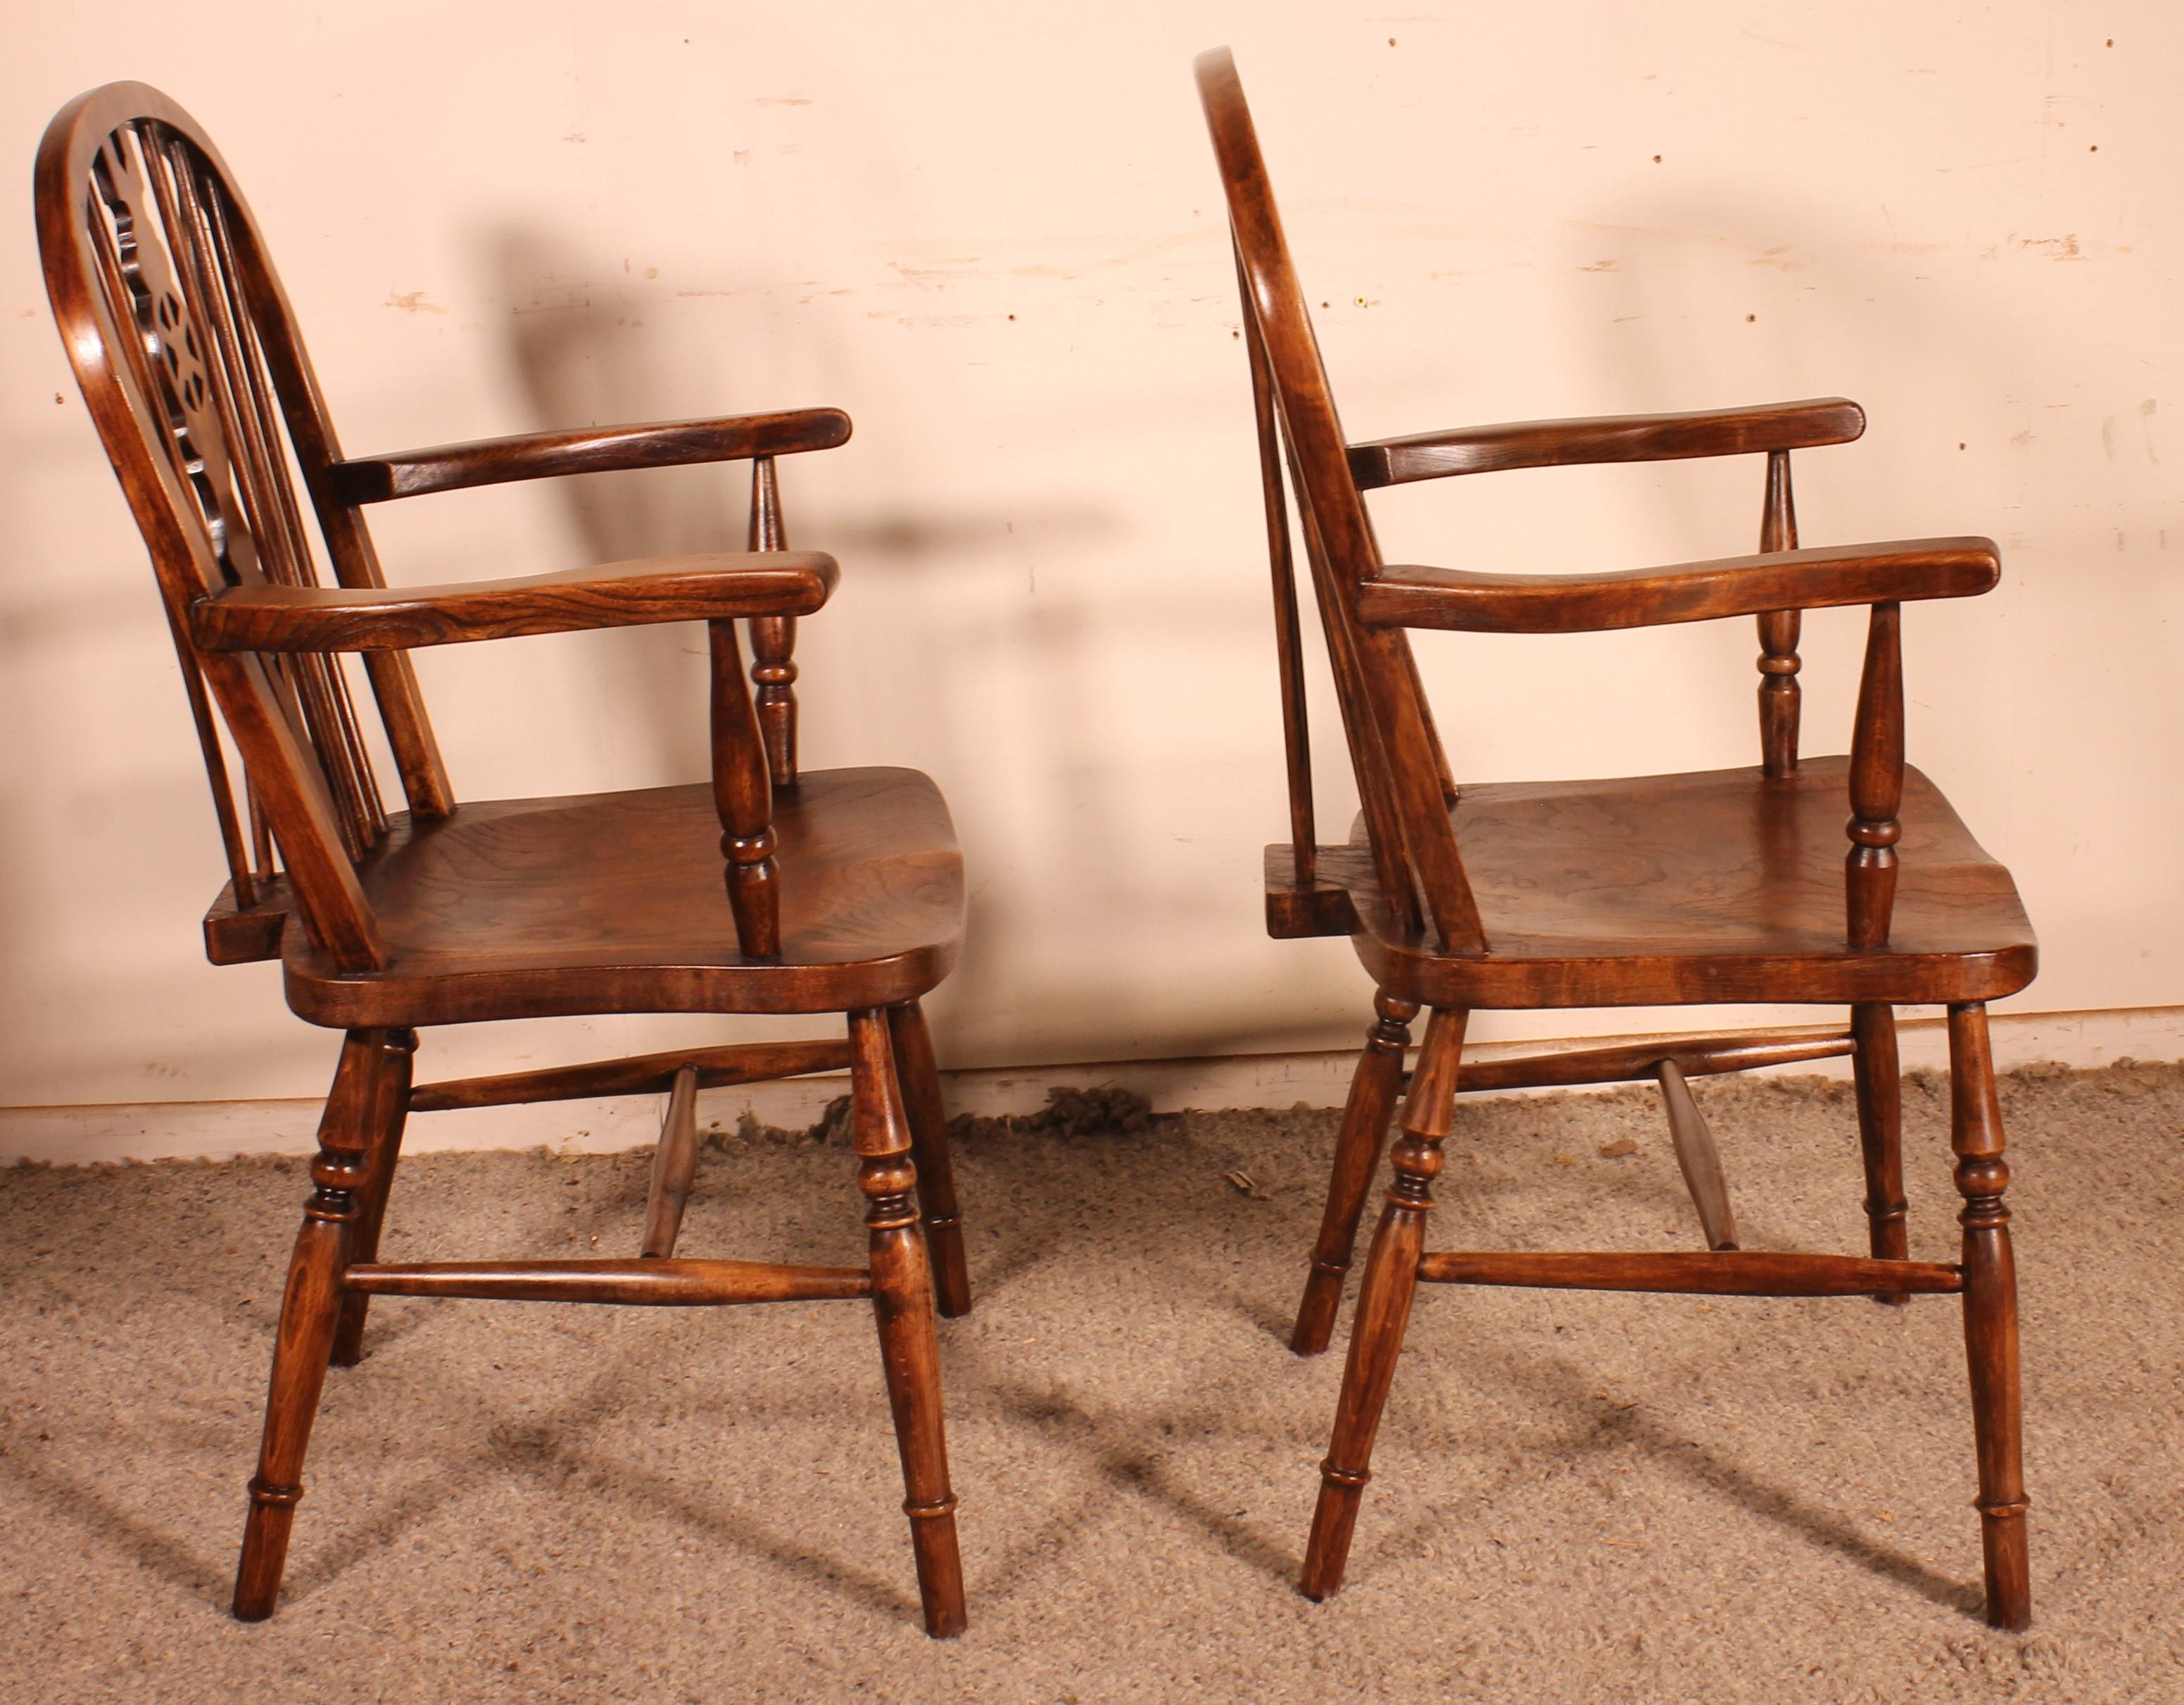 Chestnut Pair of English Windsor Armchairs from the 19th Century